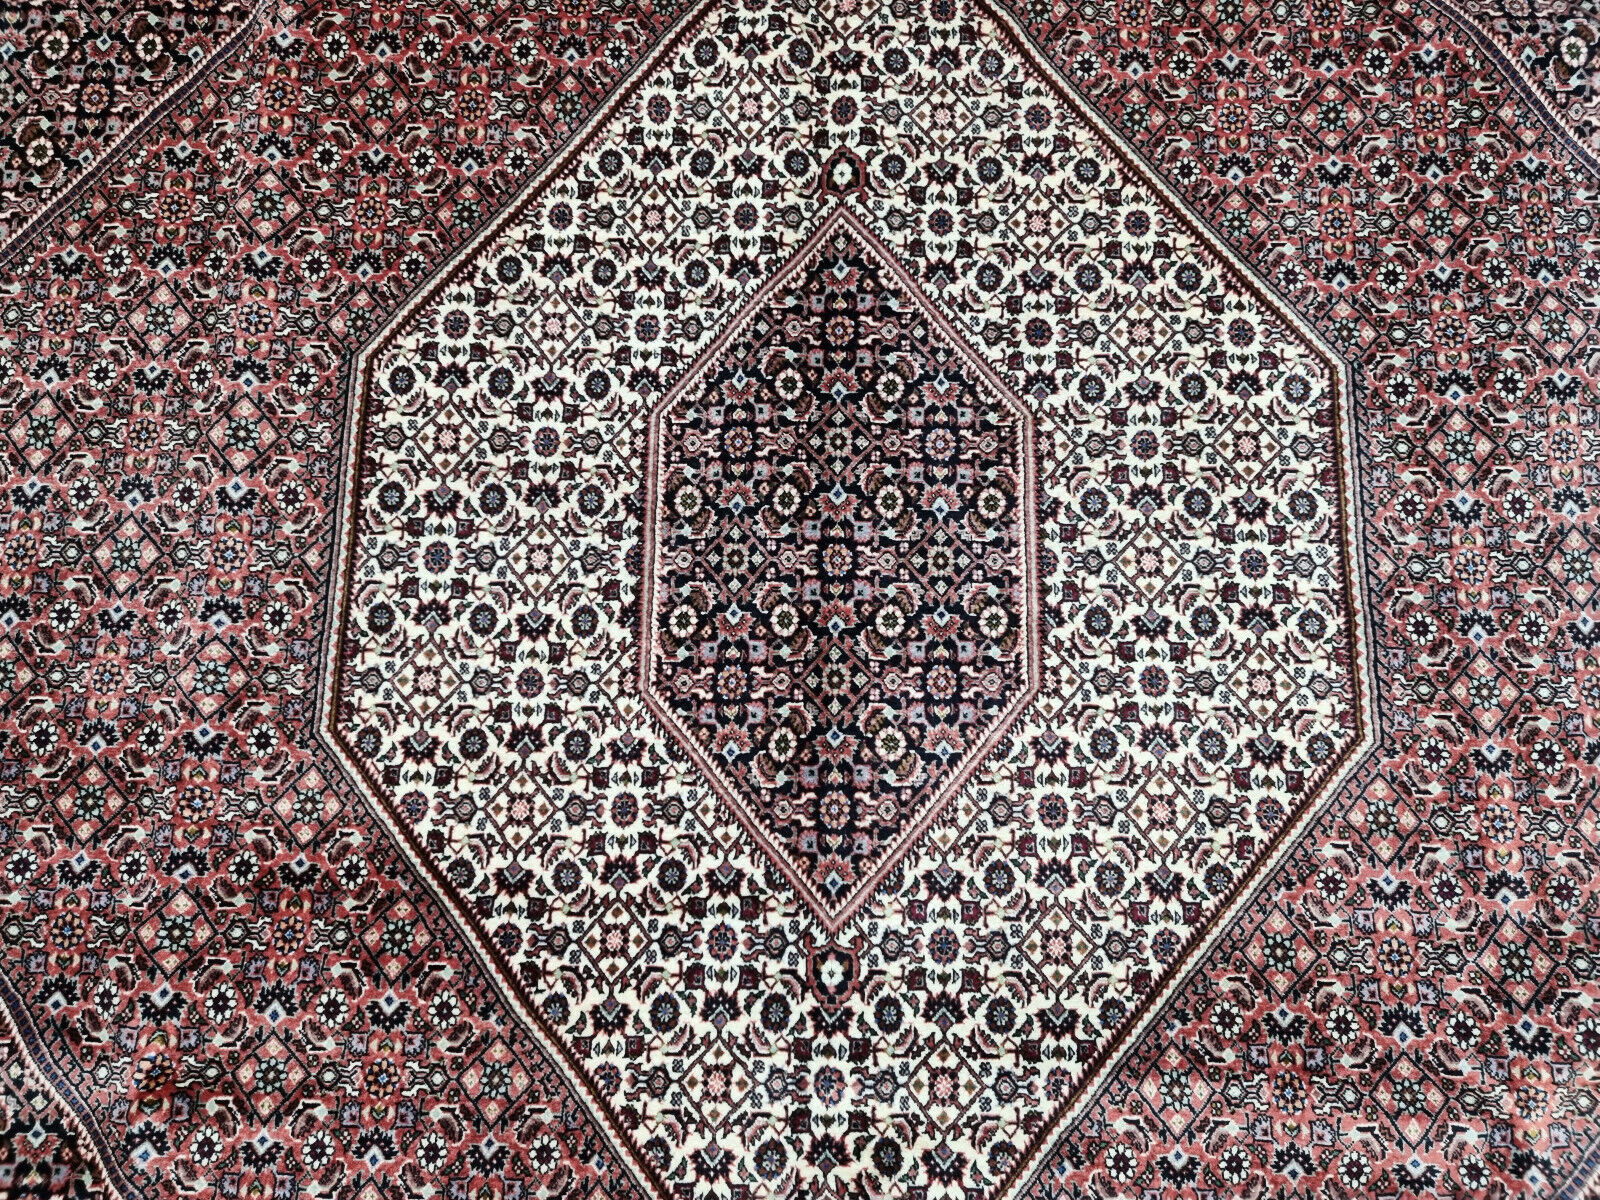 Close-up of deep red tones on Handmade Vintage Persian Bidjar Rug - Detailed view showcasing the rich red color palette of the rug.